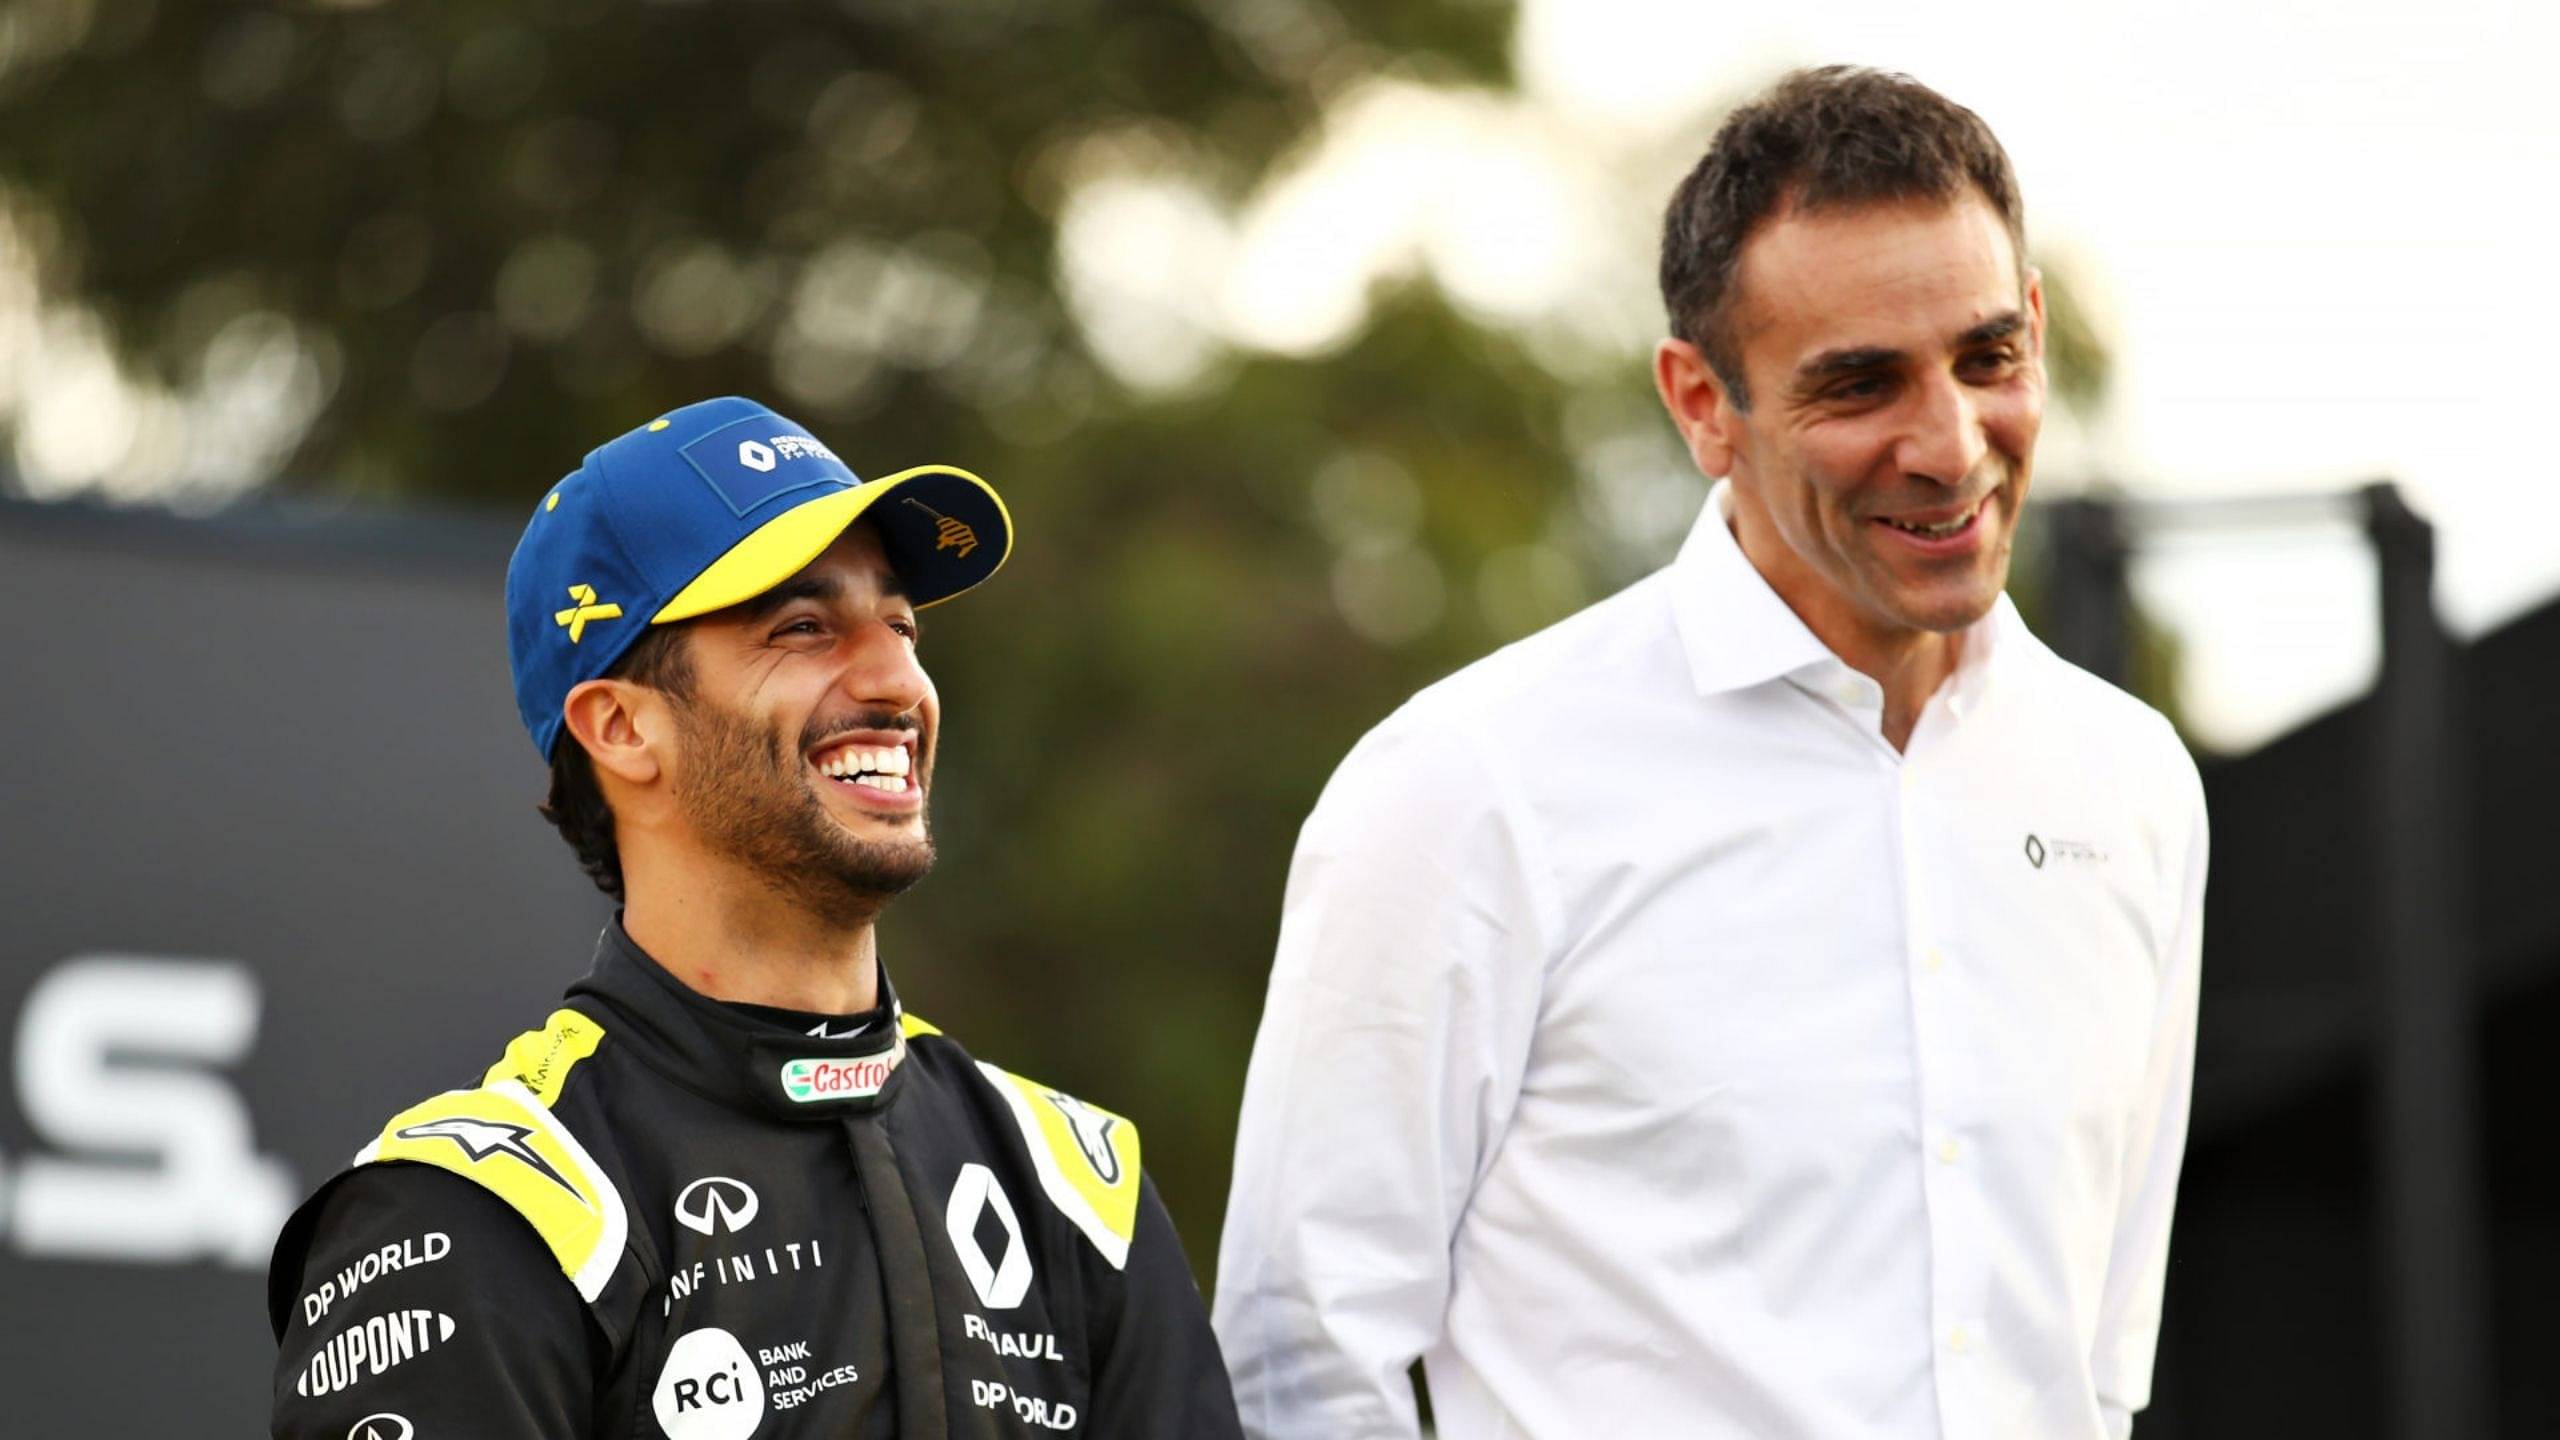 "We could just bet for one of his cars or something!” - Daniel Ricciardo suggests alternative to a tattoo bet with McLaren boss Zak Brown